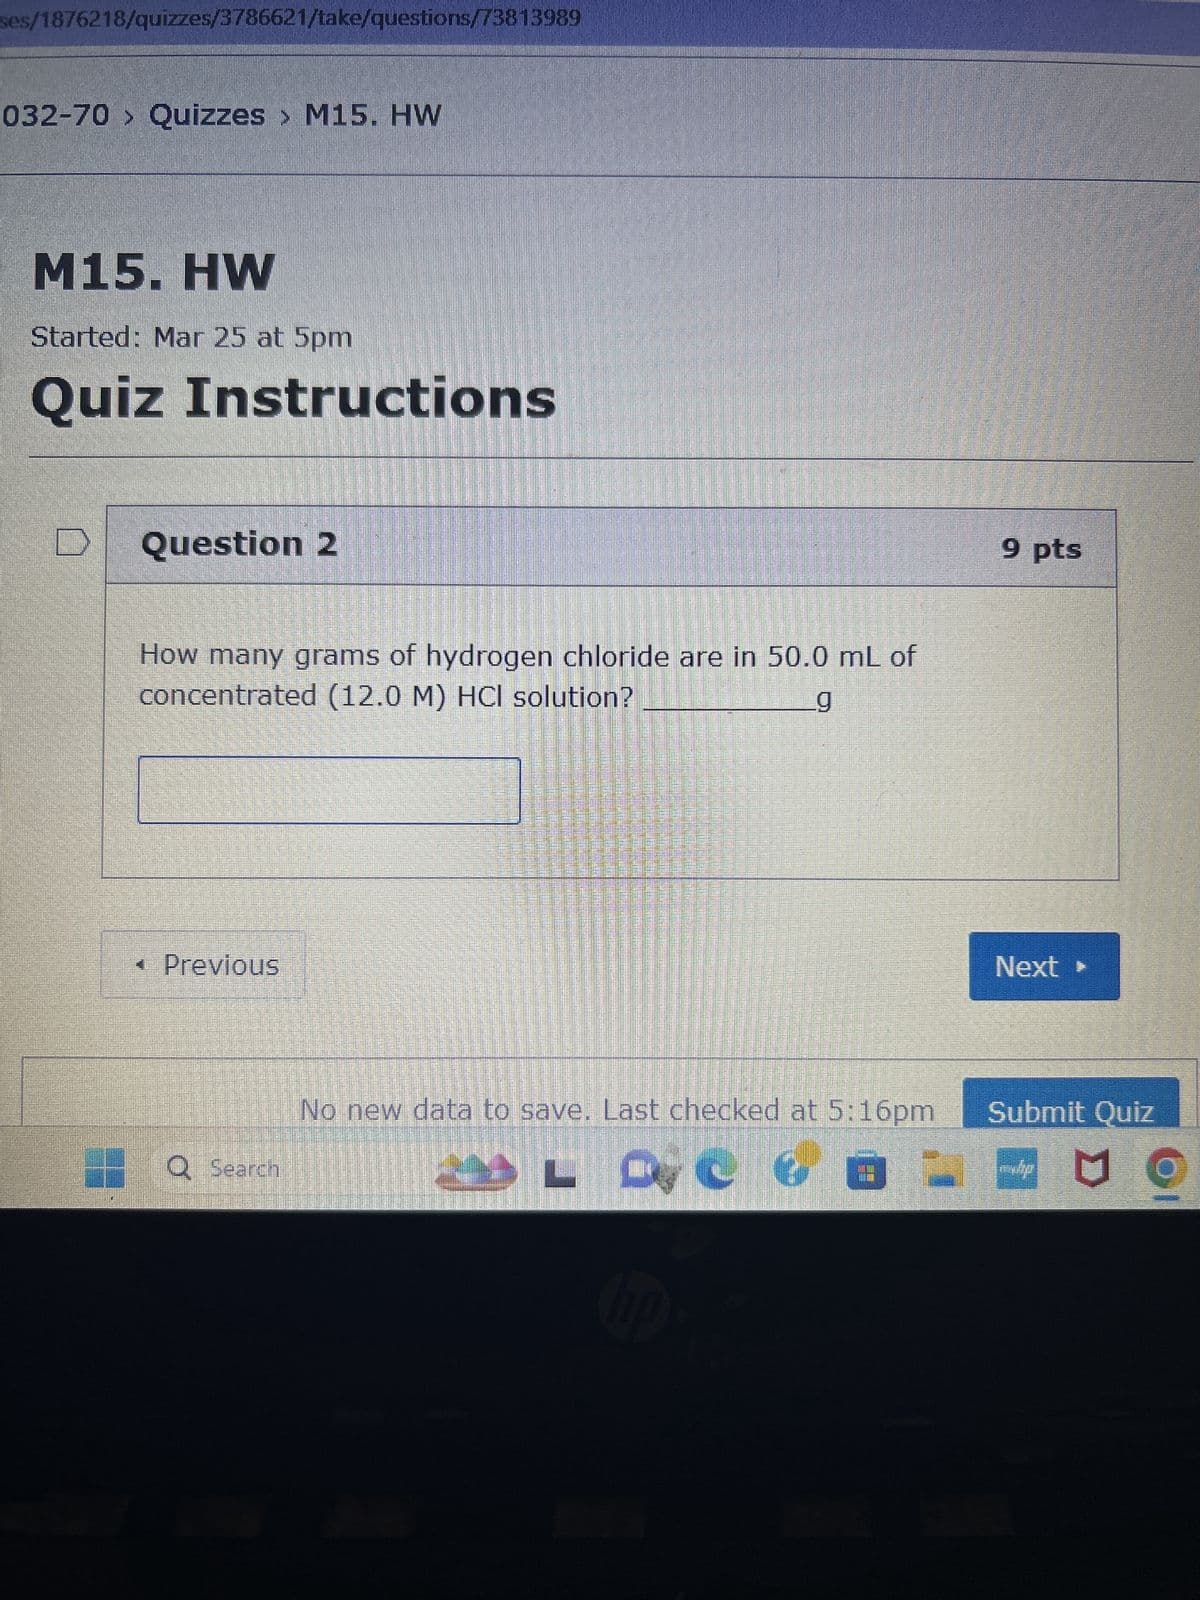 ses/1876218/quizzes/3786621/take/questions/73813989
032-70 > Quizzes > M15. HW
M15. HW
Started: Mar 25 at 5pm
Quiz Instructions
D
Question 2
How many grams of hydrogen chloride are in 50.0 mL of
concentrated (12.0 M) HCl solution?
g
< Previous
Q Search
No new data to save. Last checked at 5:16pm
LOC f
hp
9 pts
Next ▸
Submit Quiz